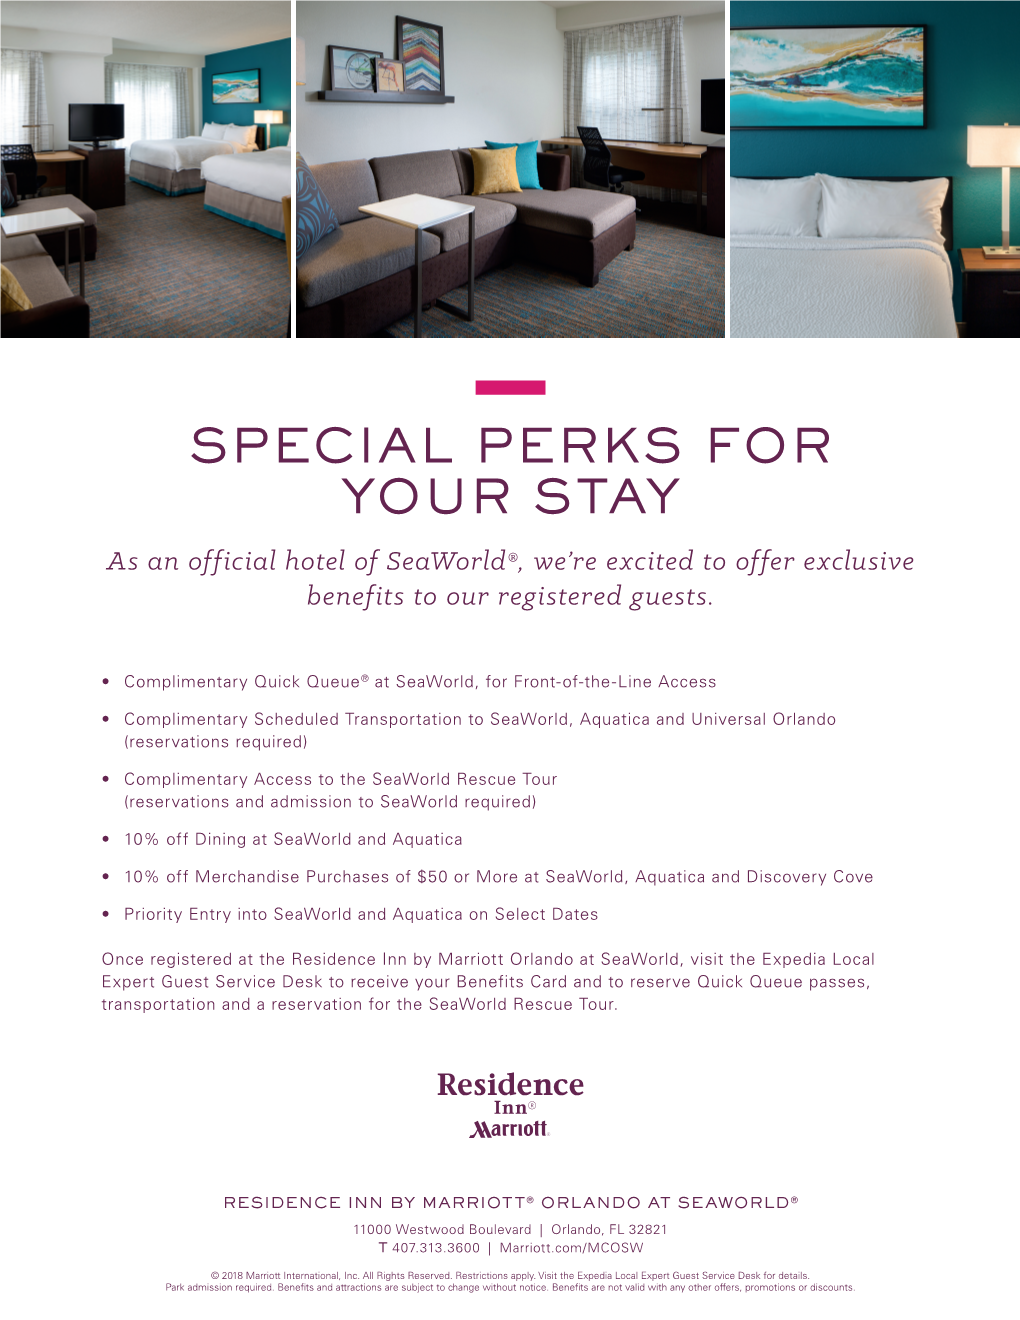 Special Perks for Your Stay